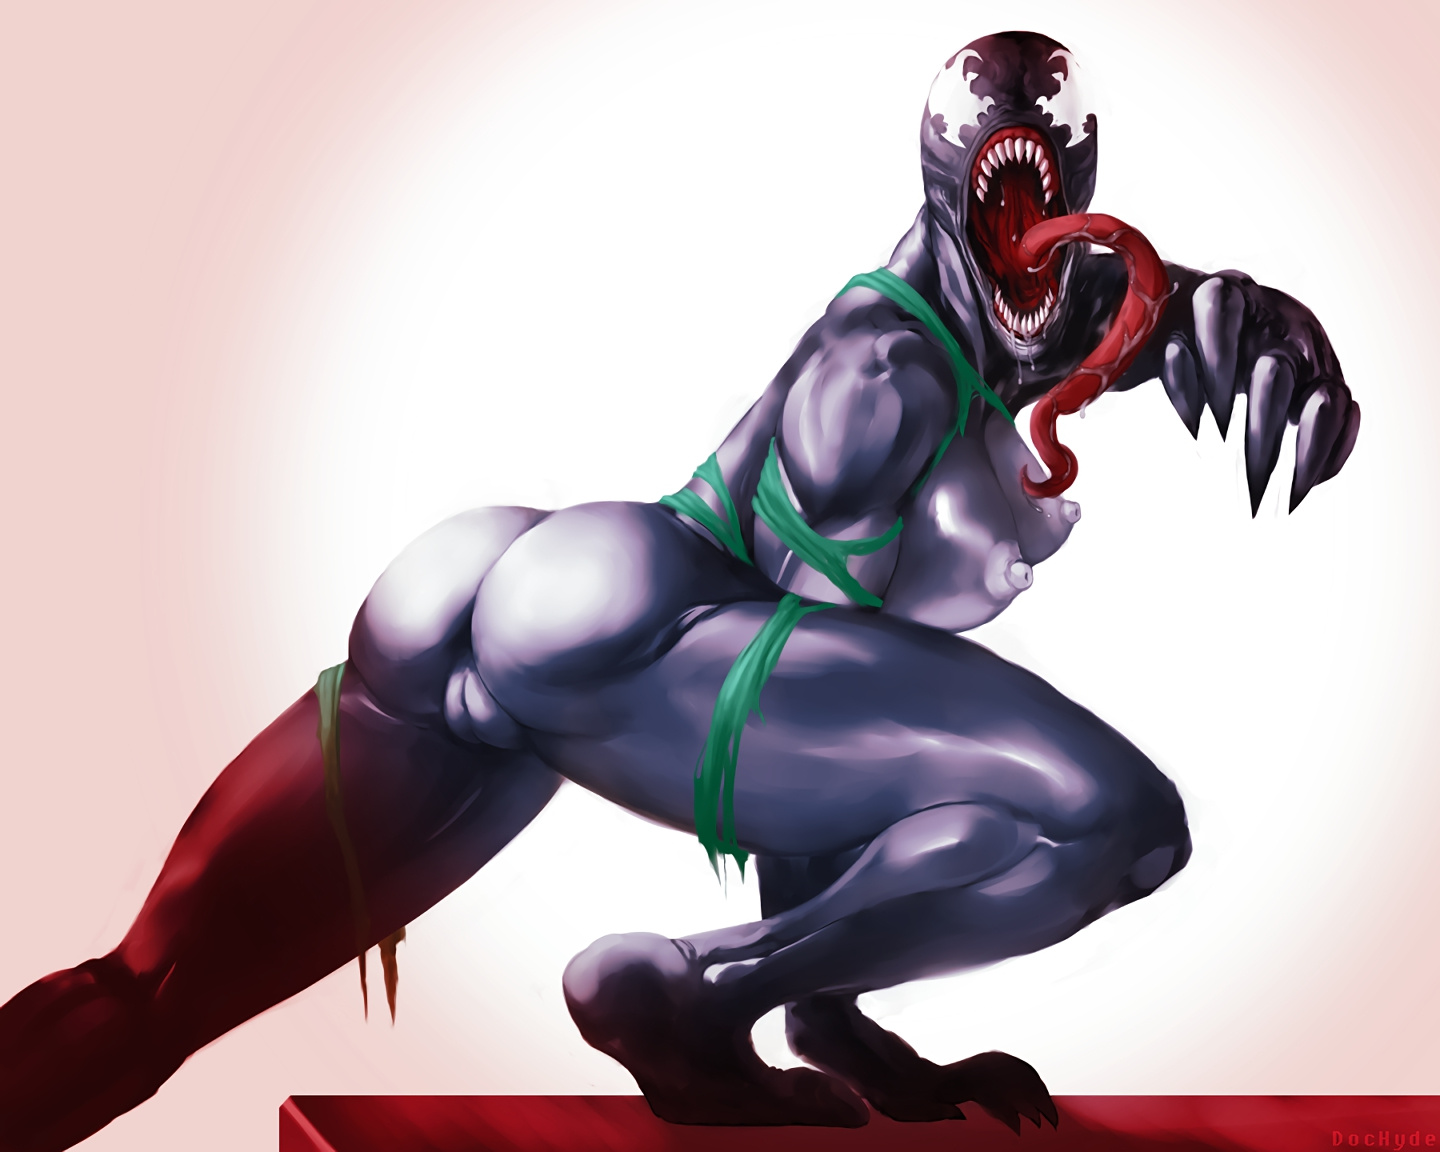 Matchpoint recomended spiderman futa angle lapdance gives femvenom